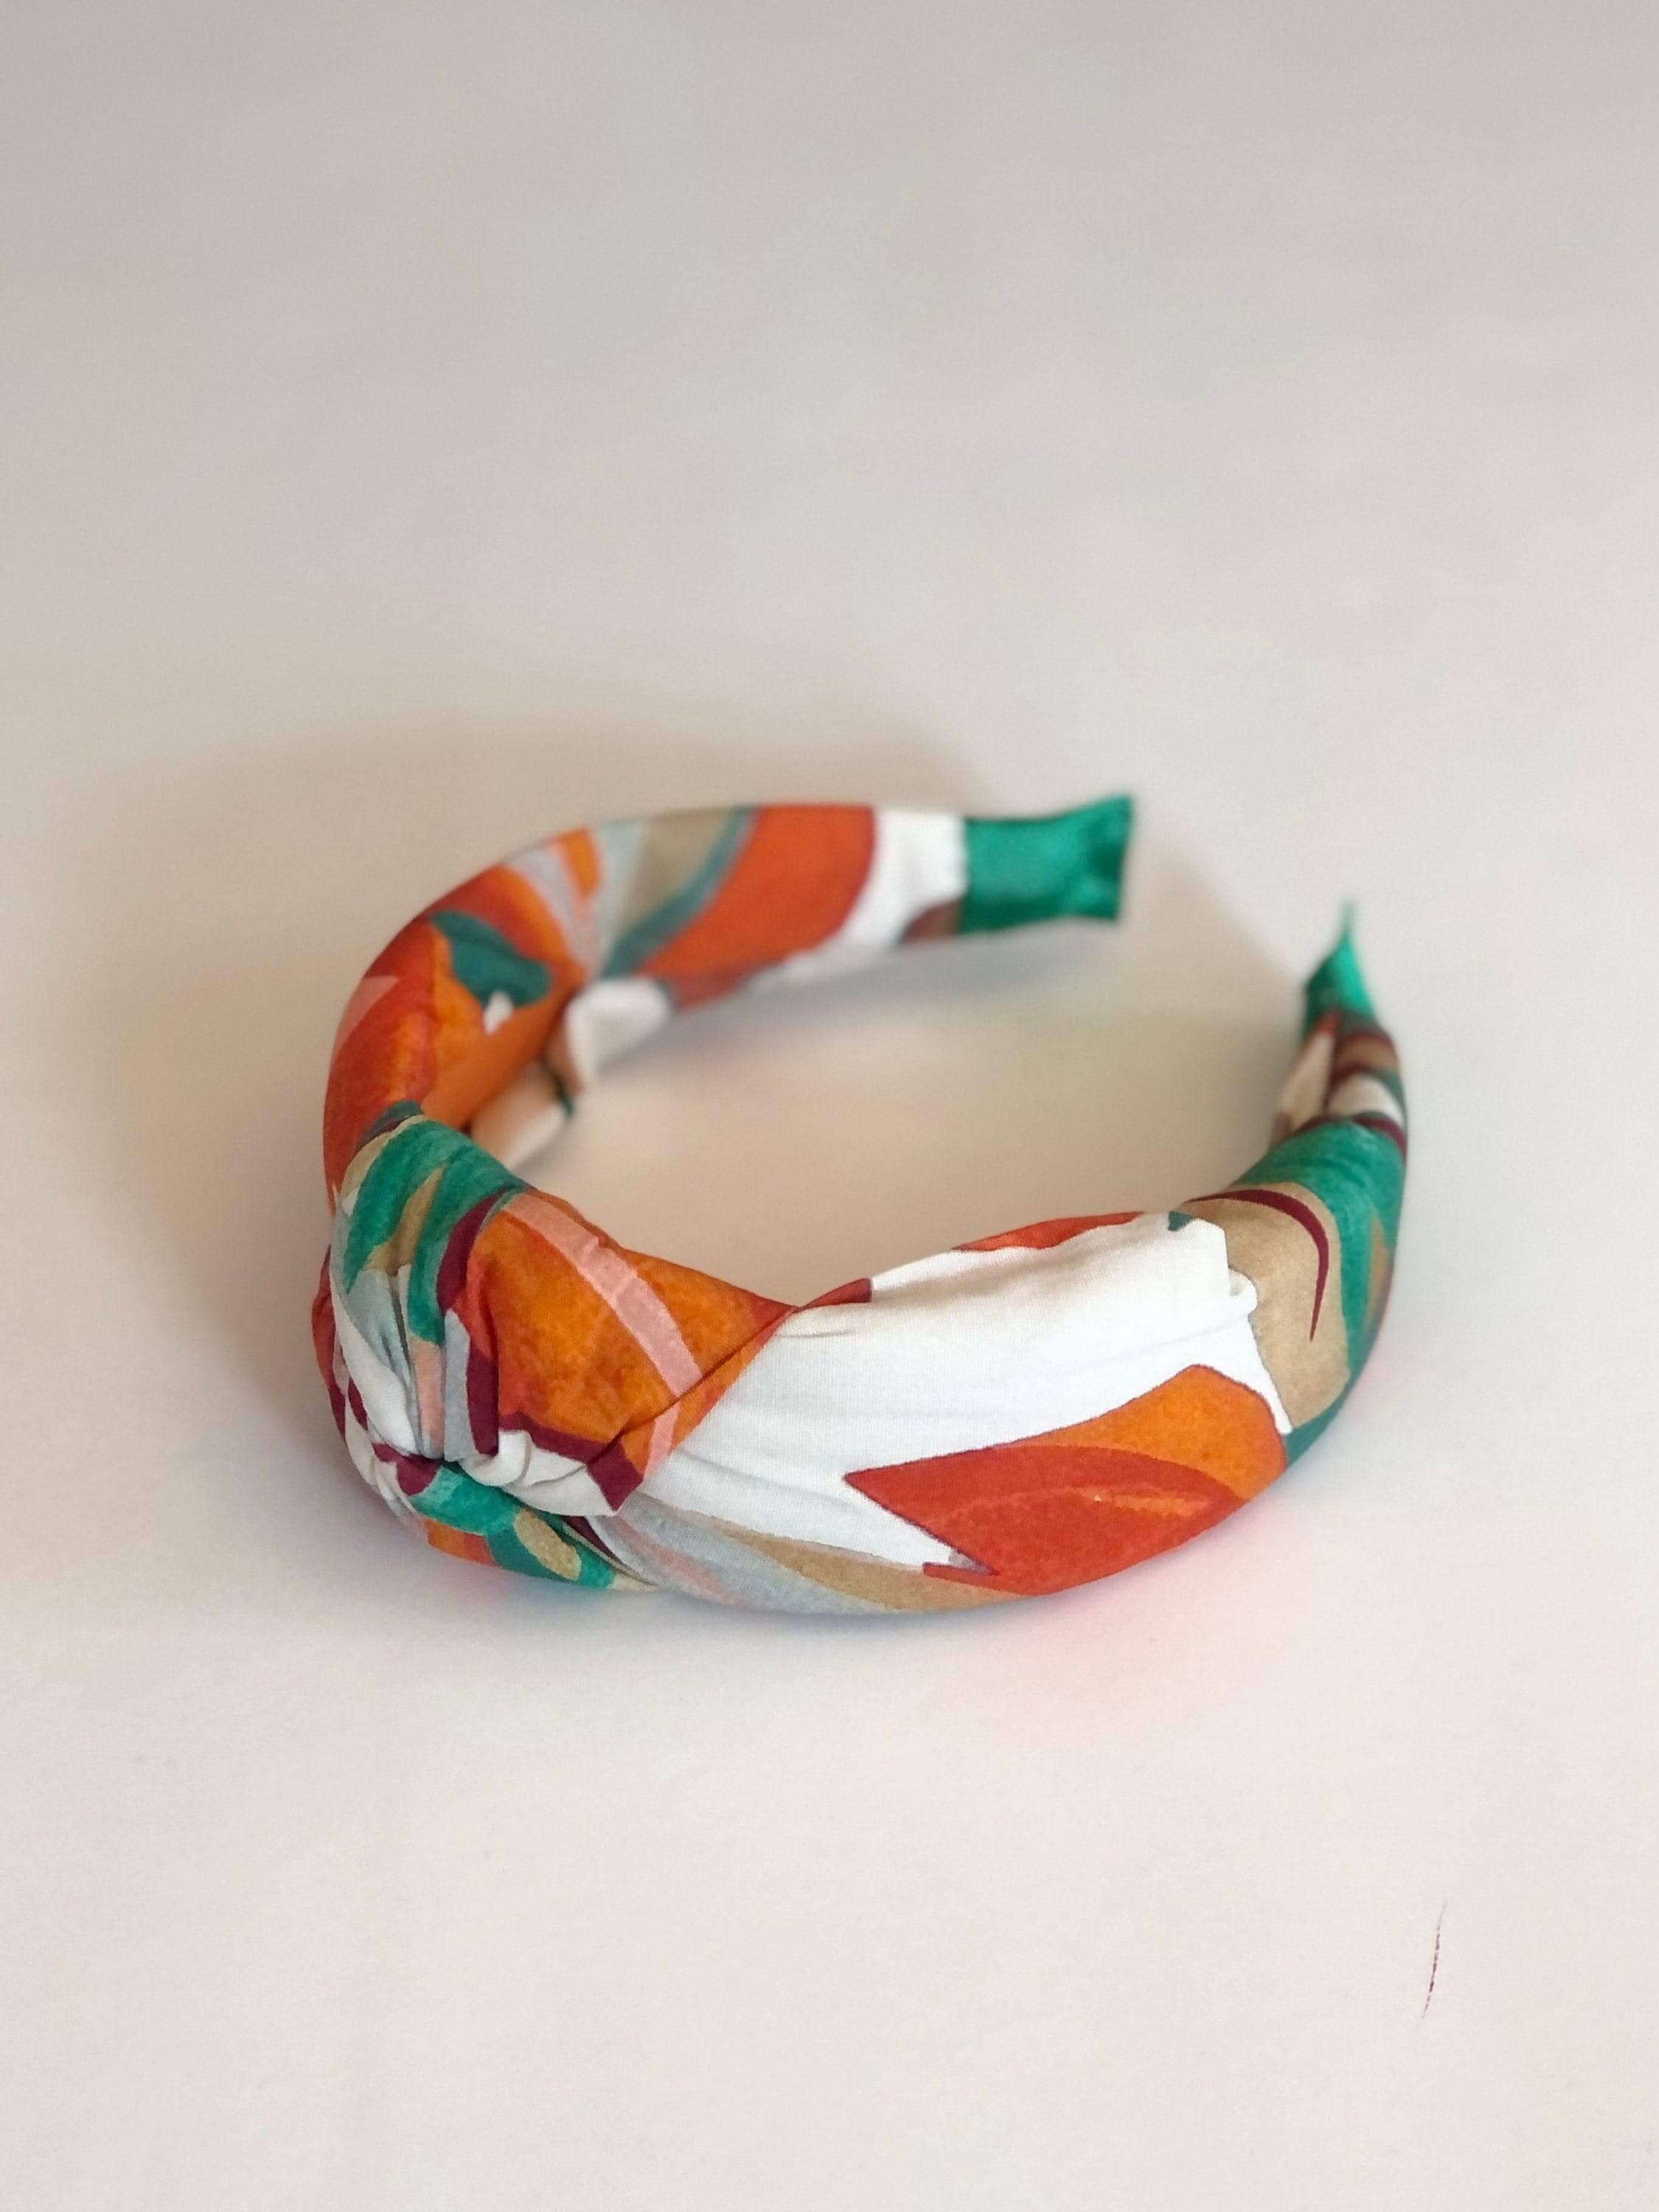 Make a statement with this eye-catching knotted headband, featuring a fun leaf pattern and bold color scheme.